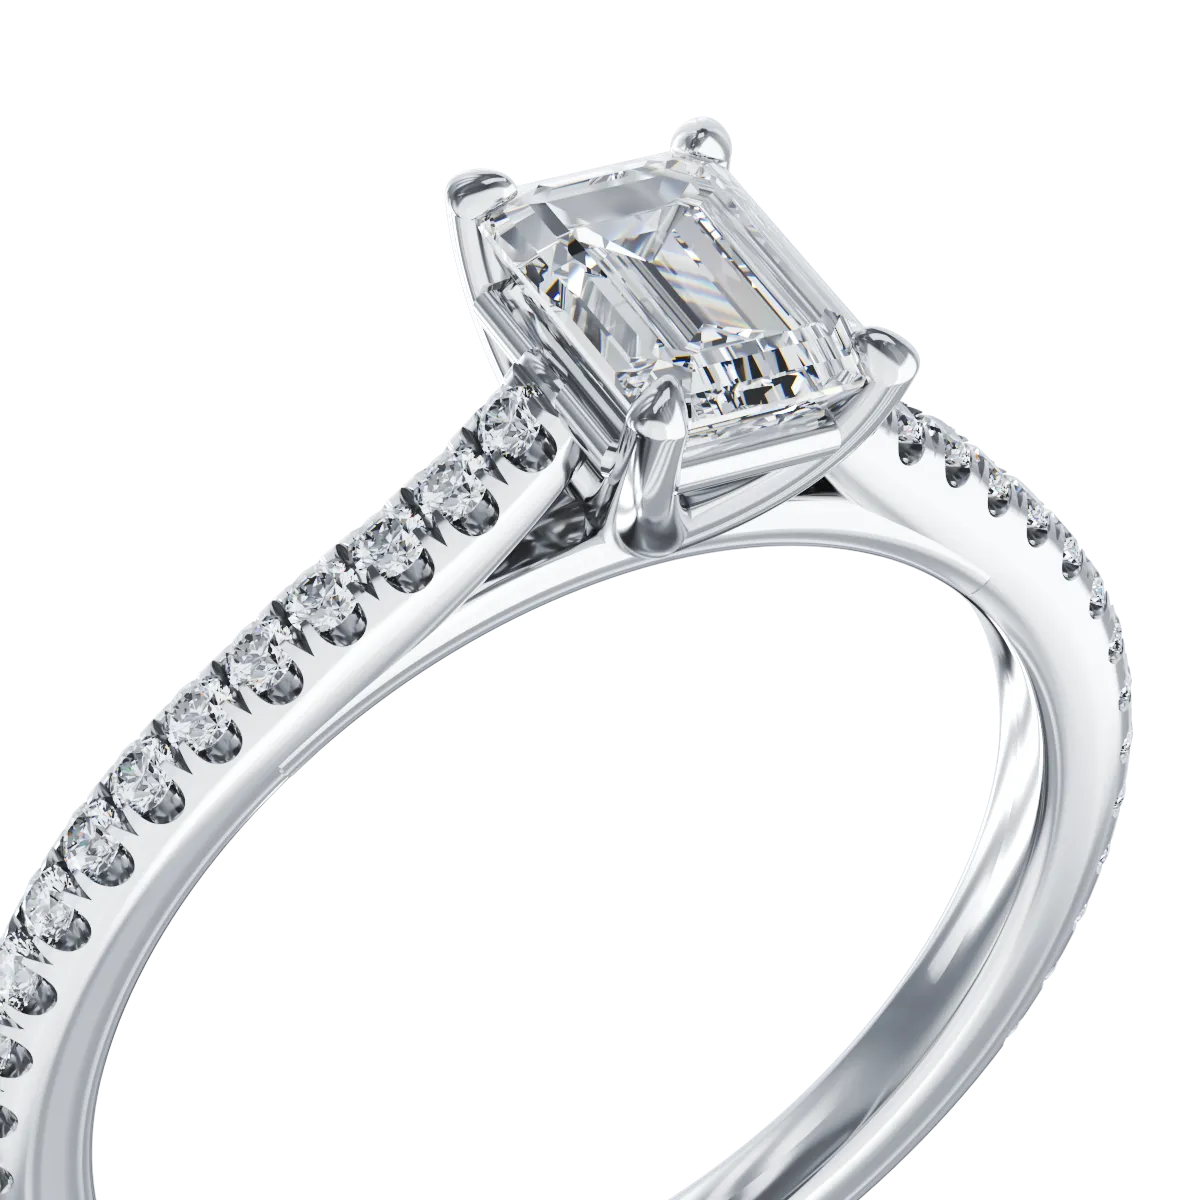 18K white gold engagement ring with 0.6ct diamond and 0.187ct diamonds